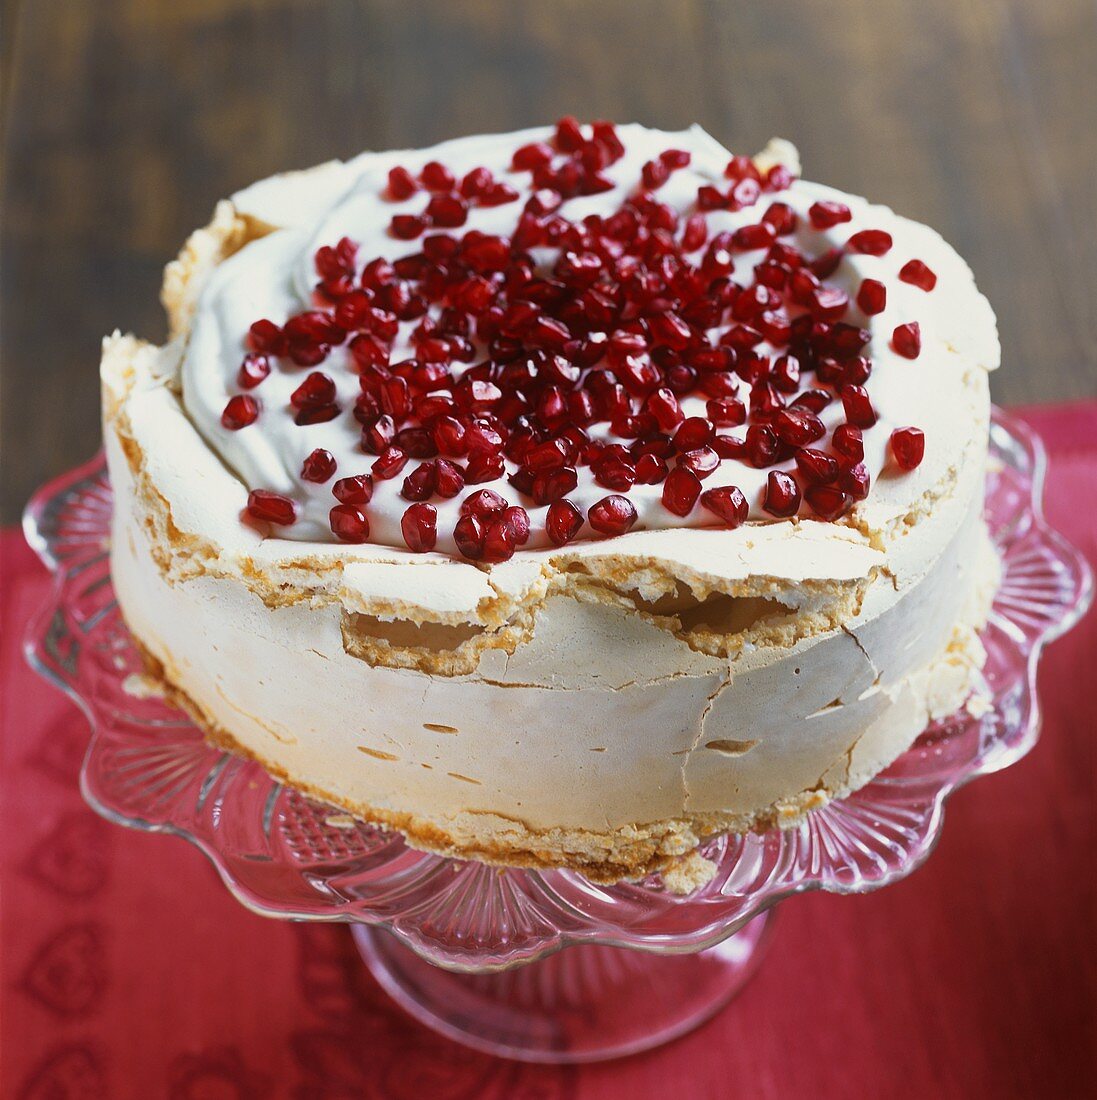 Meringue cake with cream and pomegranate seeds